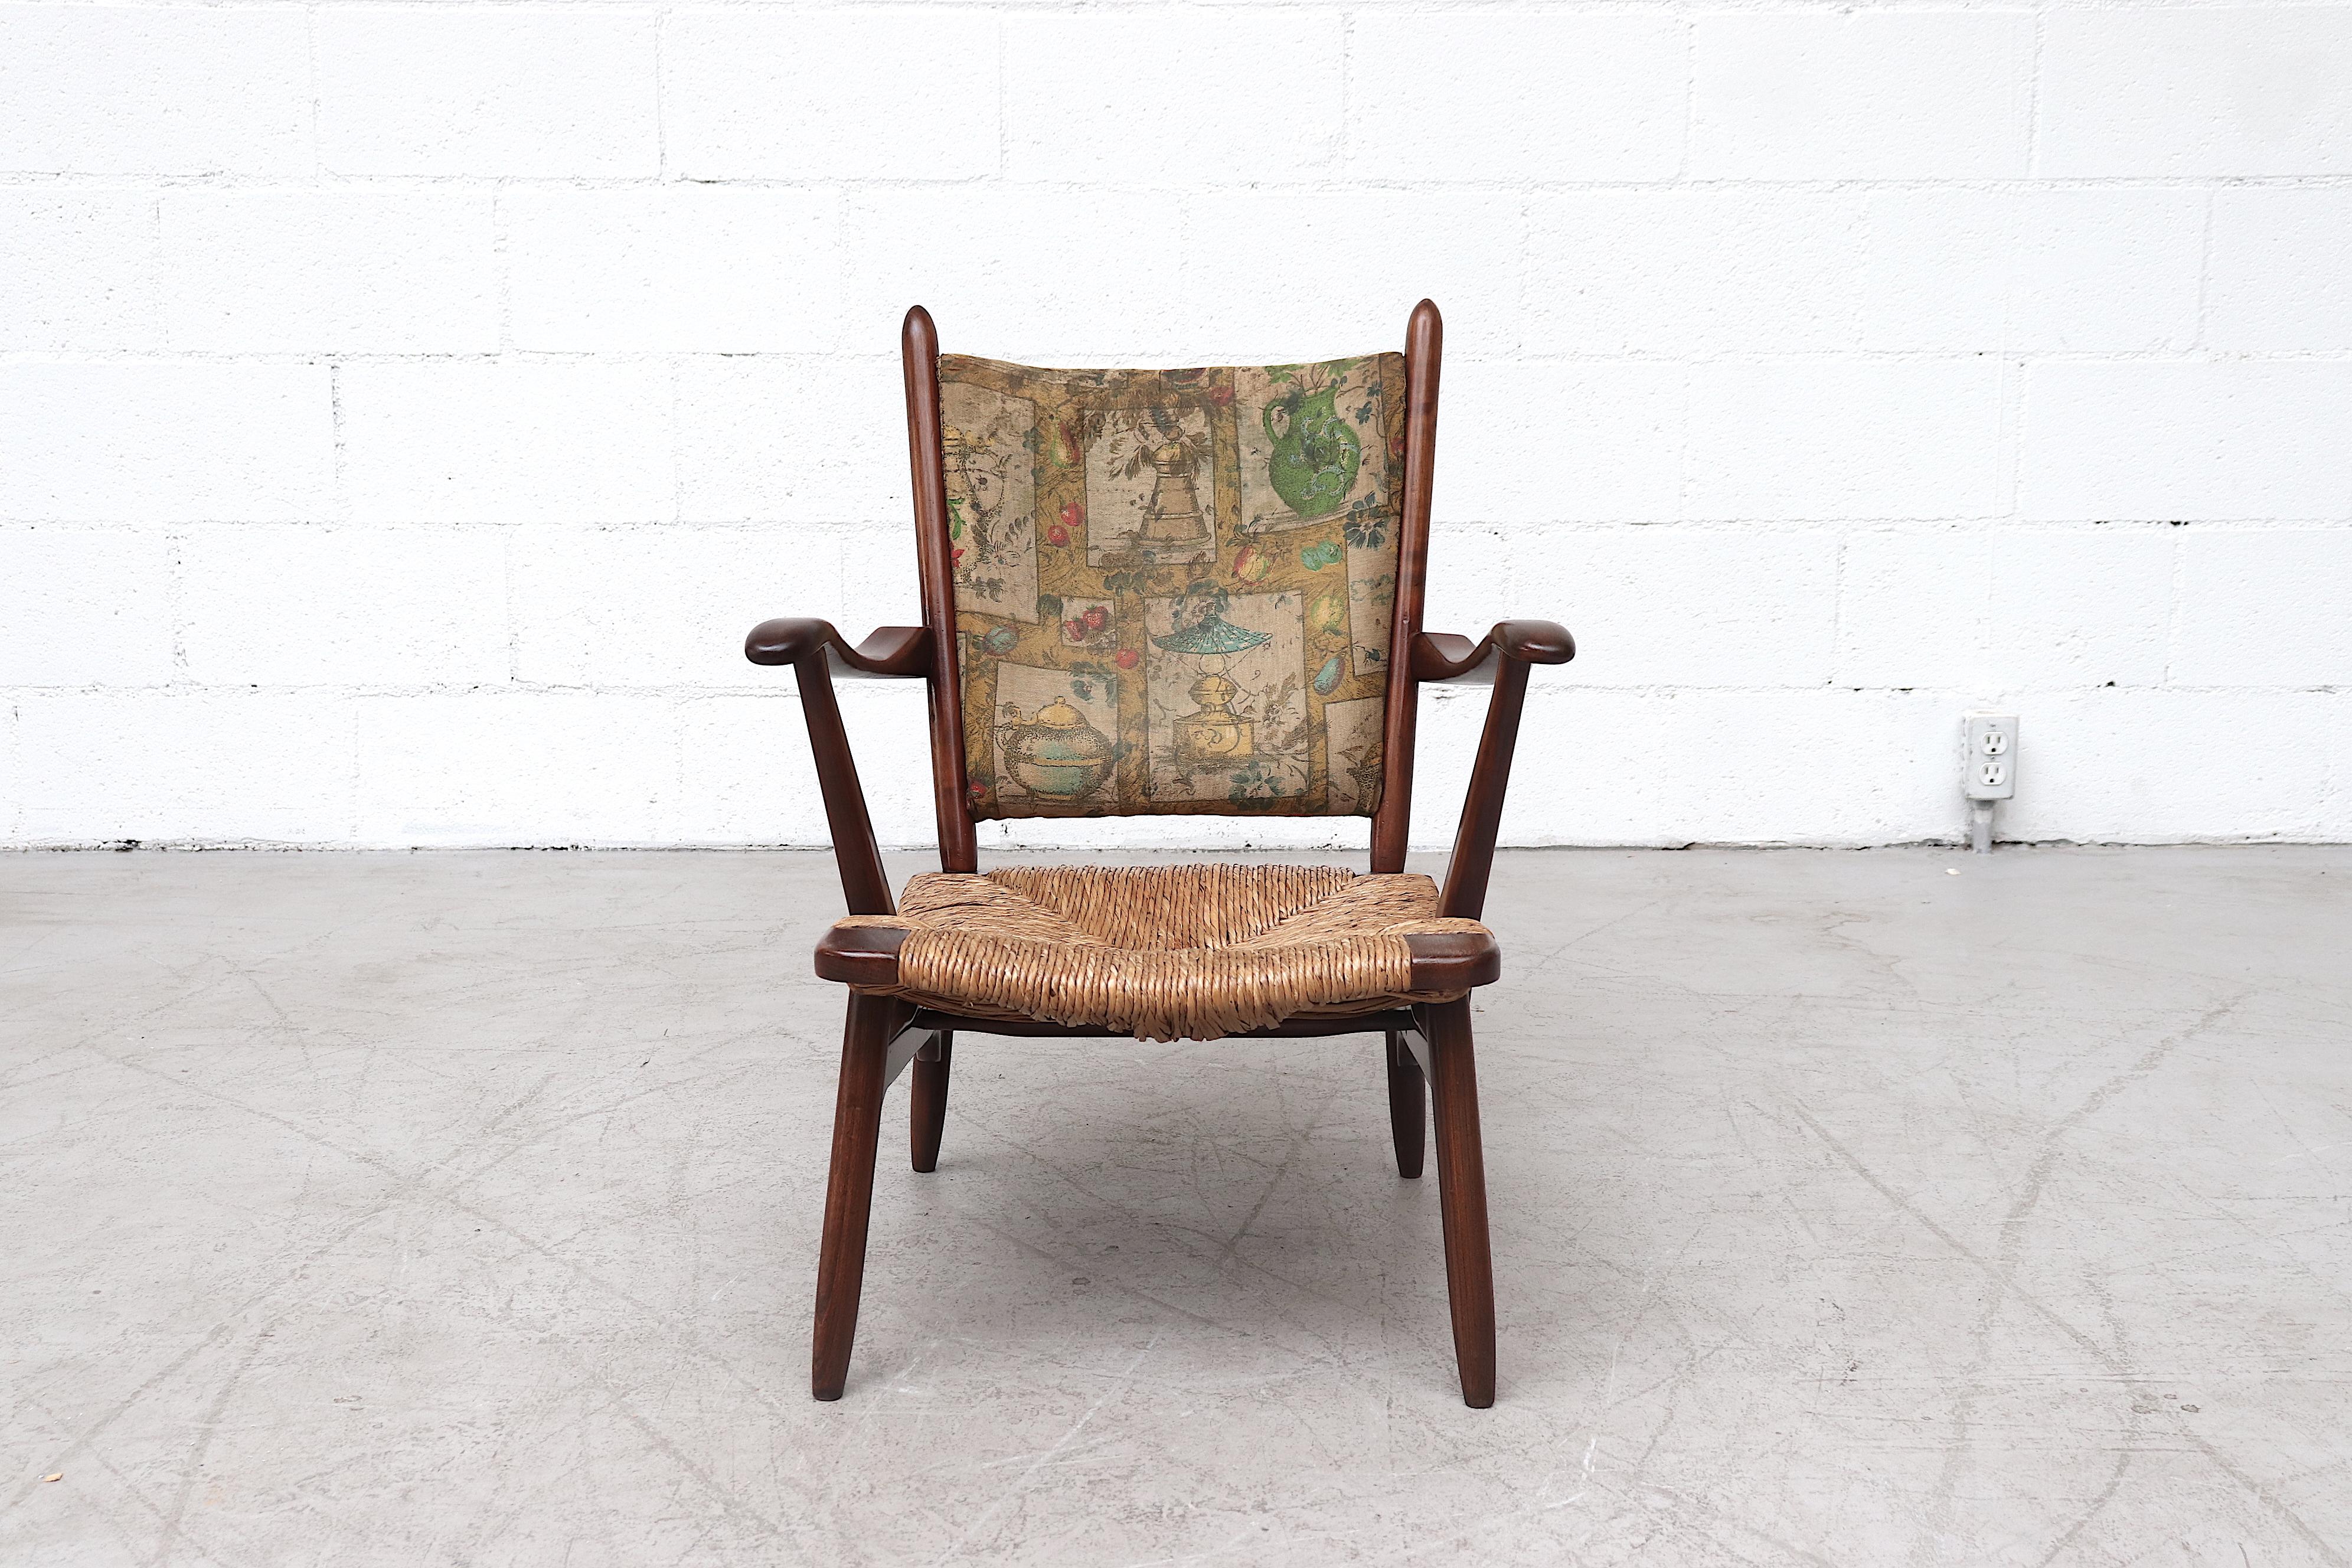 Petite Bas Van Pelt style low back lounge chair with rattan seat and curved arms. Lightly refinished with rattan weaved seat rest and curved back. In original condition with normal wear consistent with age and use. A complimentary high back chair